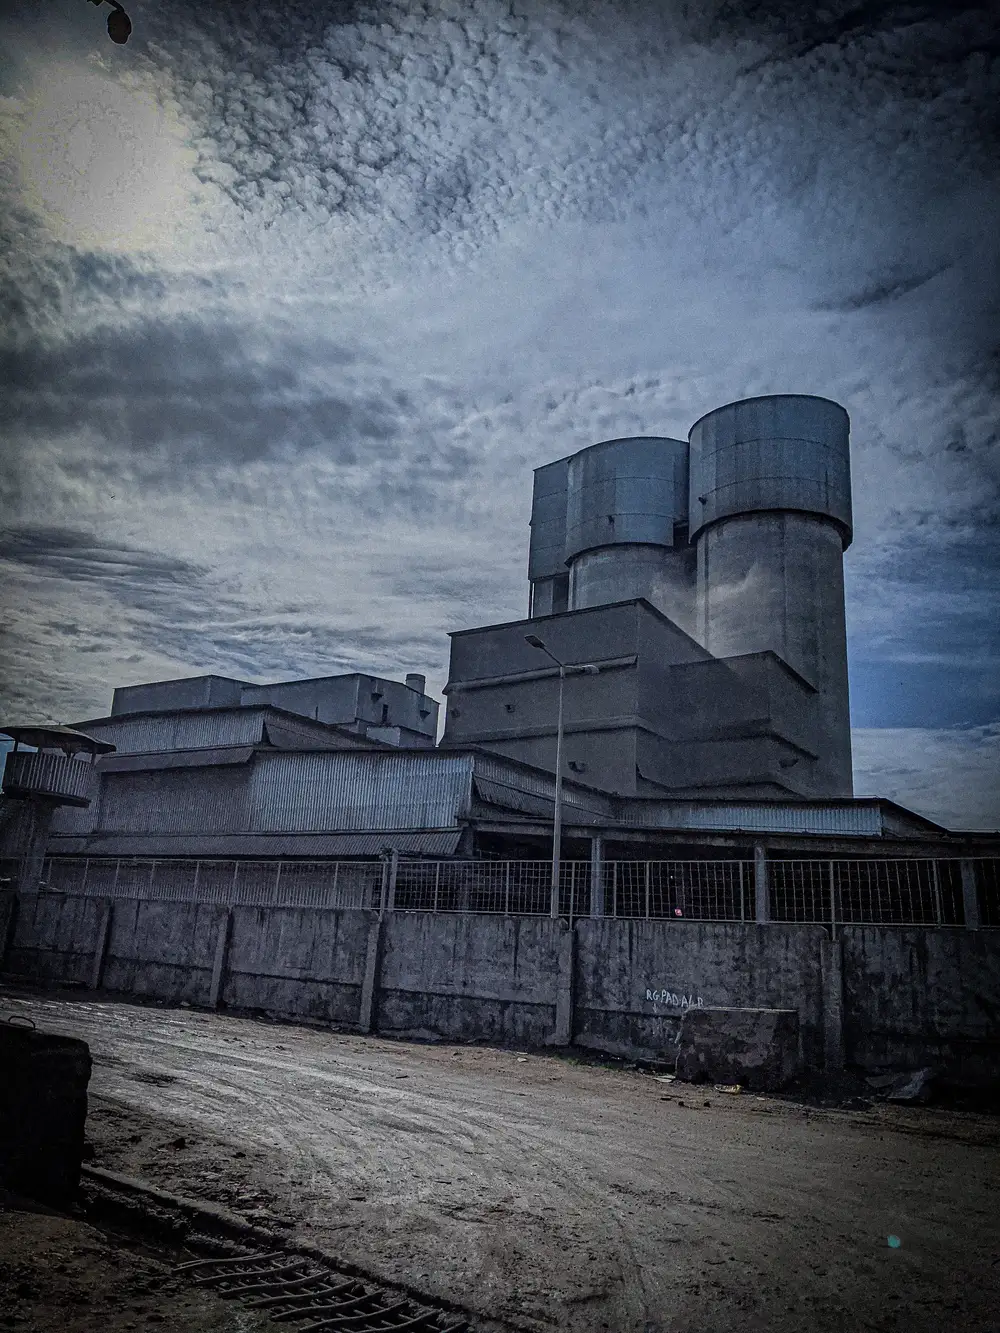 Cement industry